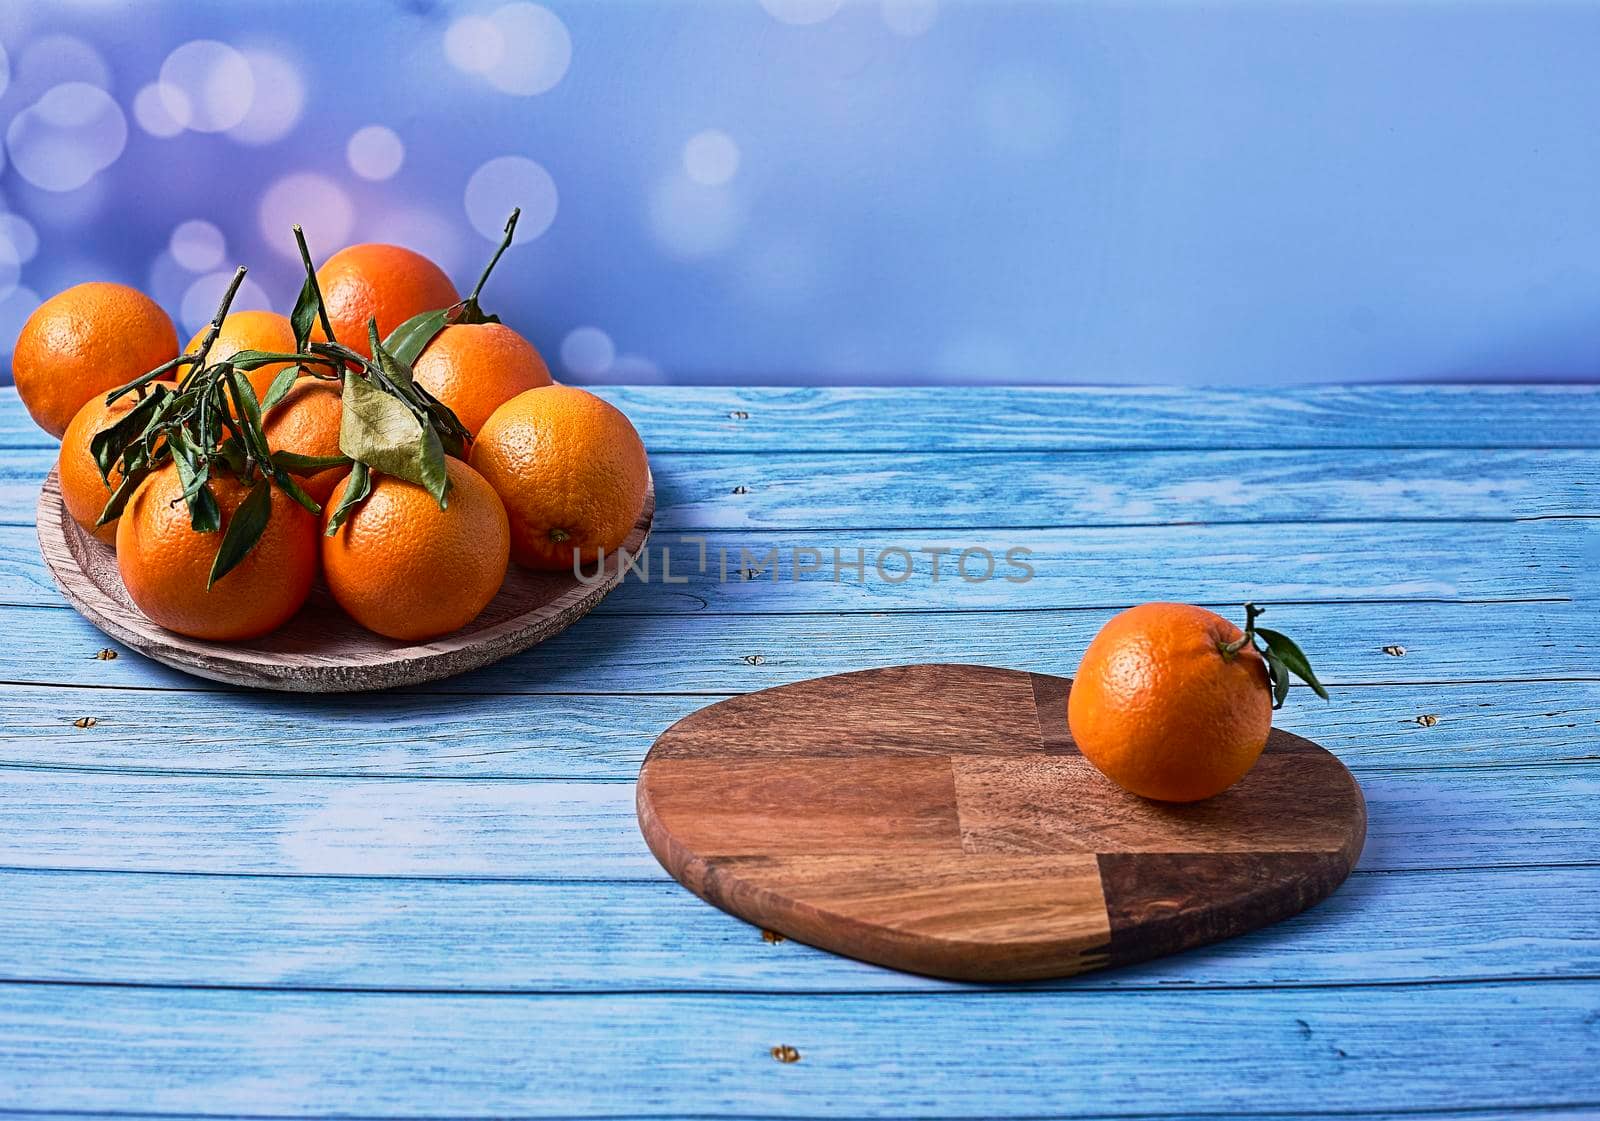 Orange on wooden board and group of oranges on wooden plate on bright background and wooden floor